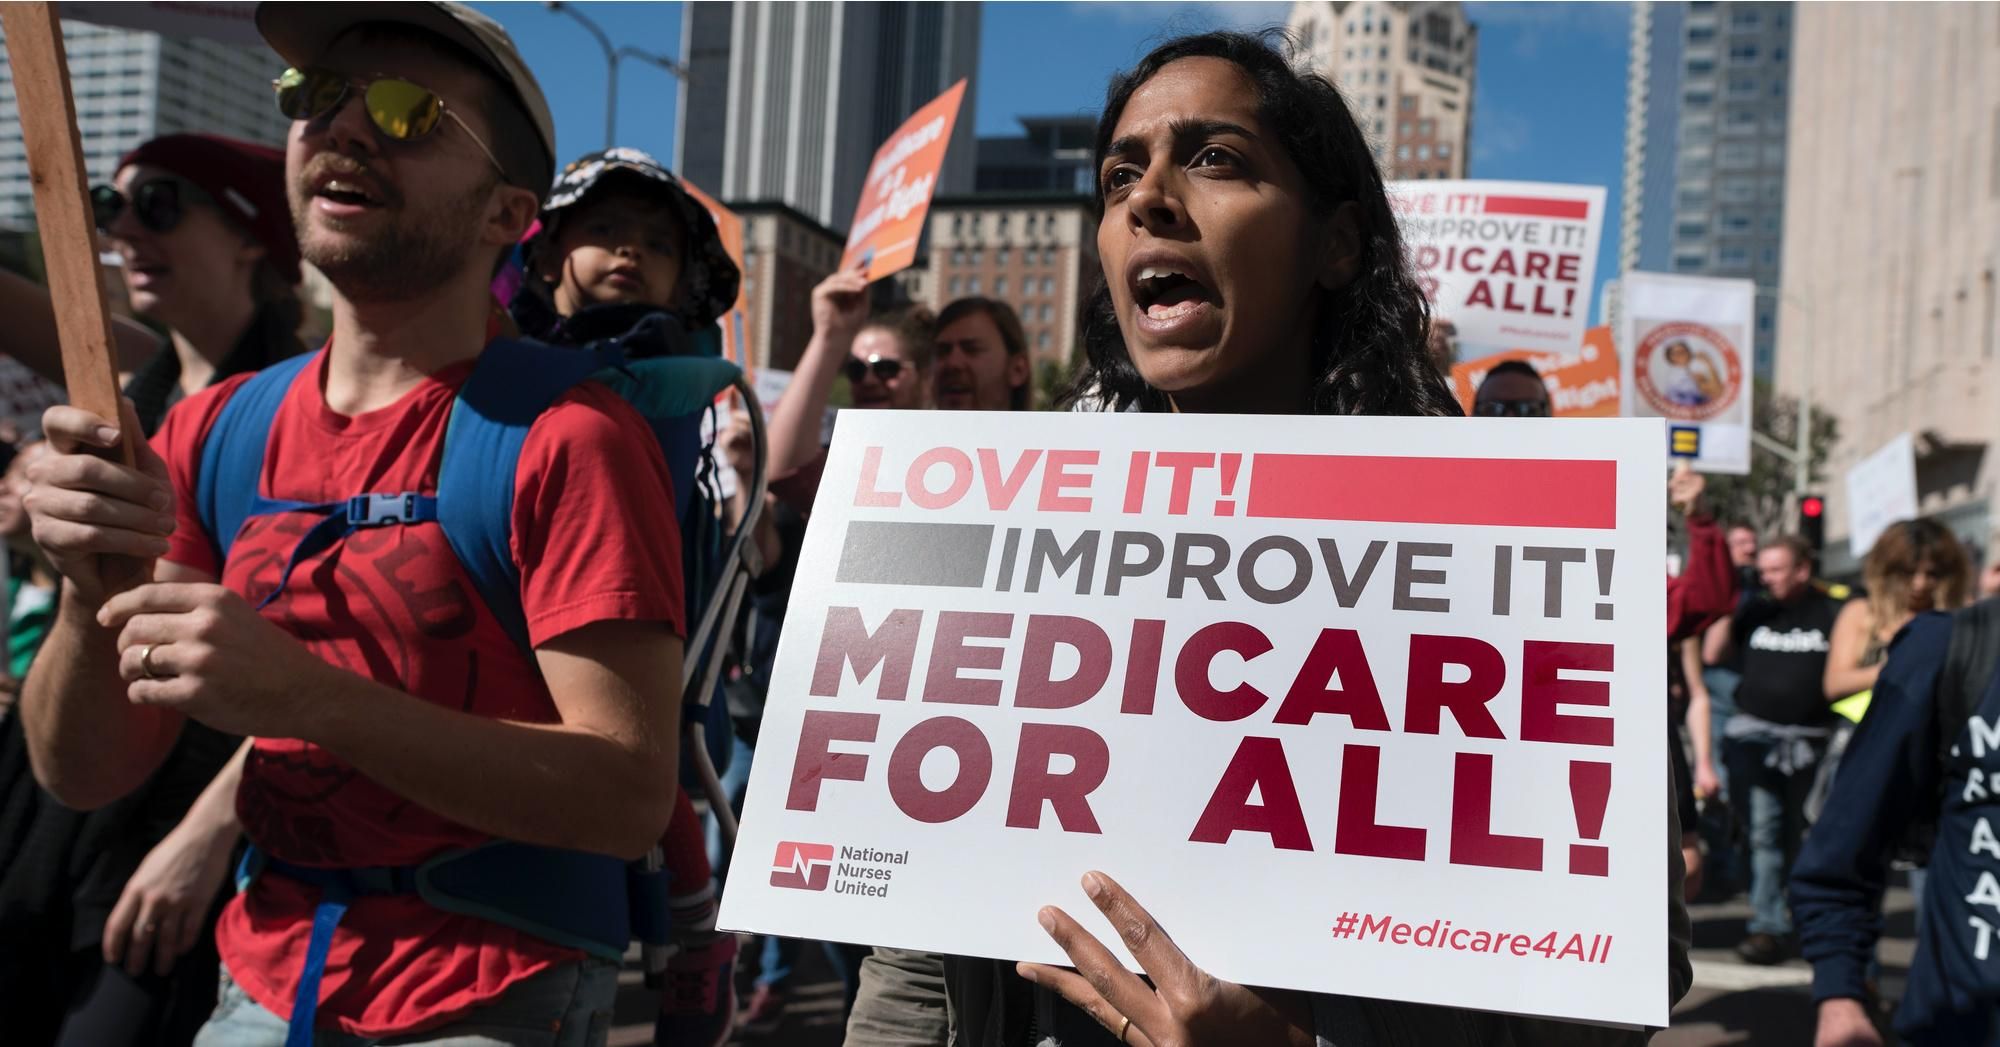 Participants in the Medicare for All Rally in Los Angeles California on February 4, 2017. Organizers called for a single-payer system for Medicare. (Photo by Ronen Tivony/NurPhoto via Getty Images)